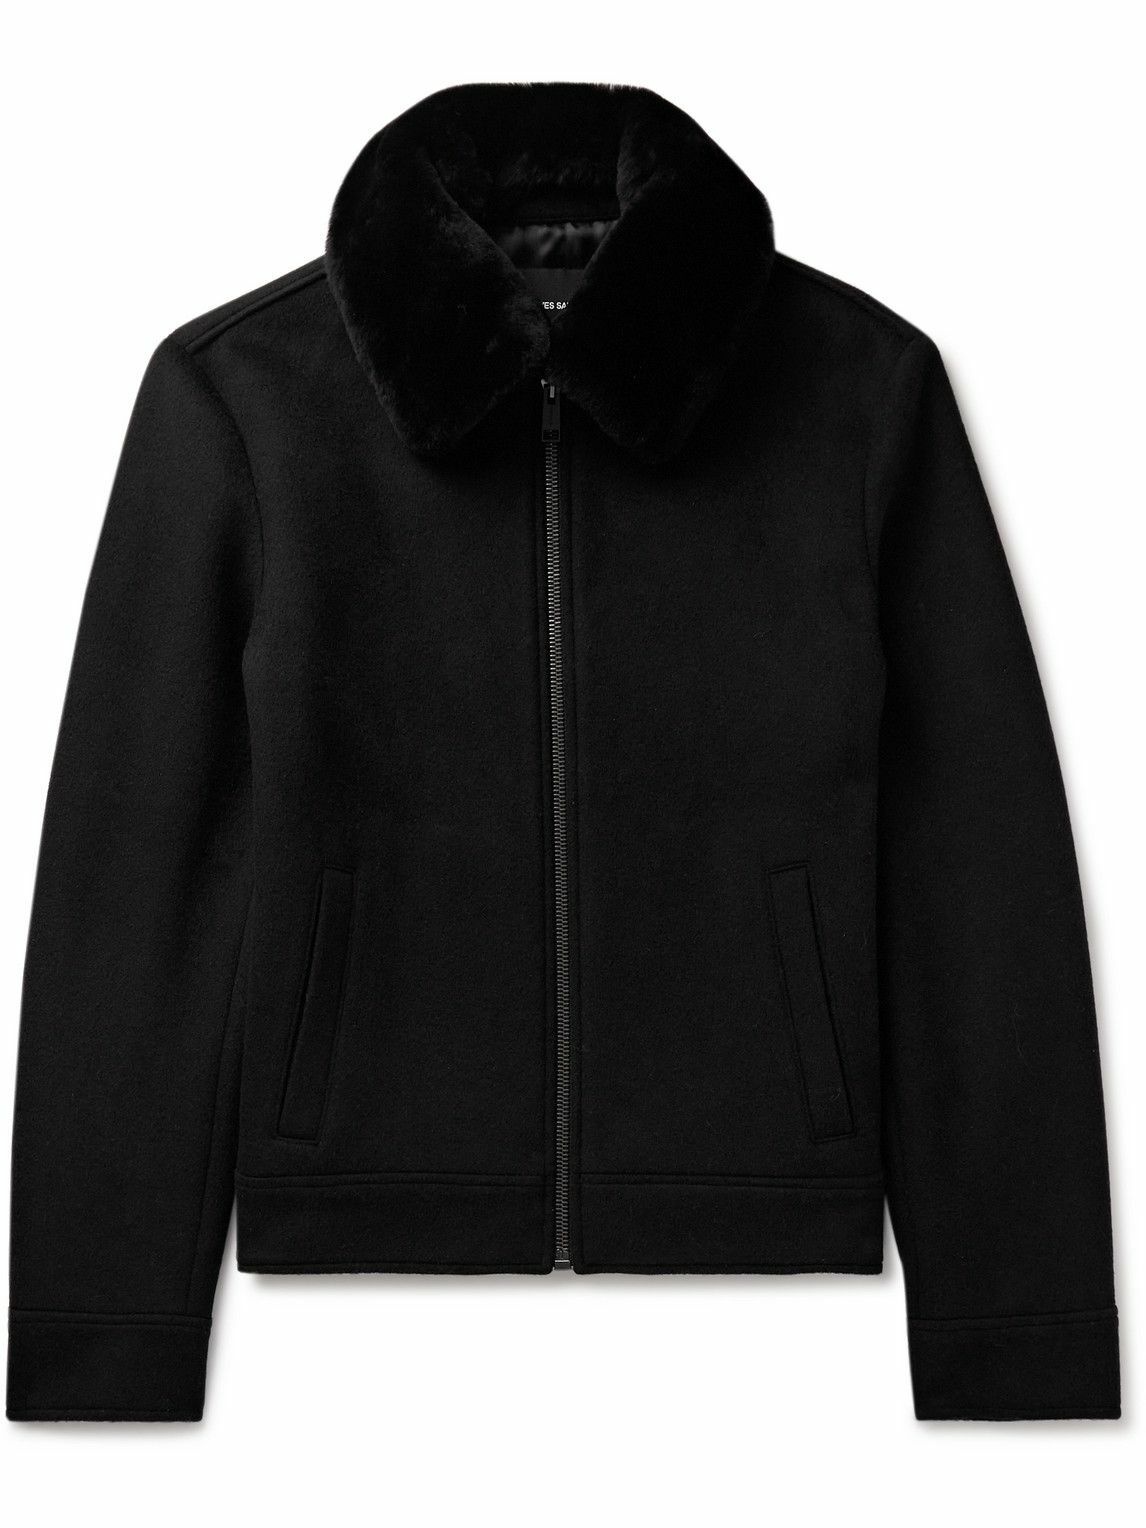 Photo: Yves Salomon - Shearling-Trimmed Wool and Cashmere-Blend Jacket - Black